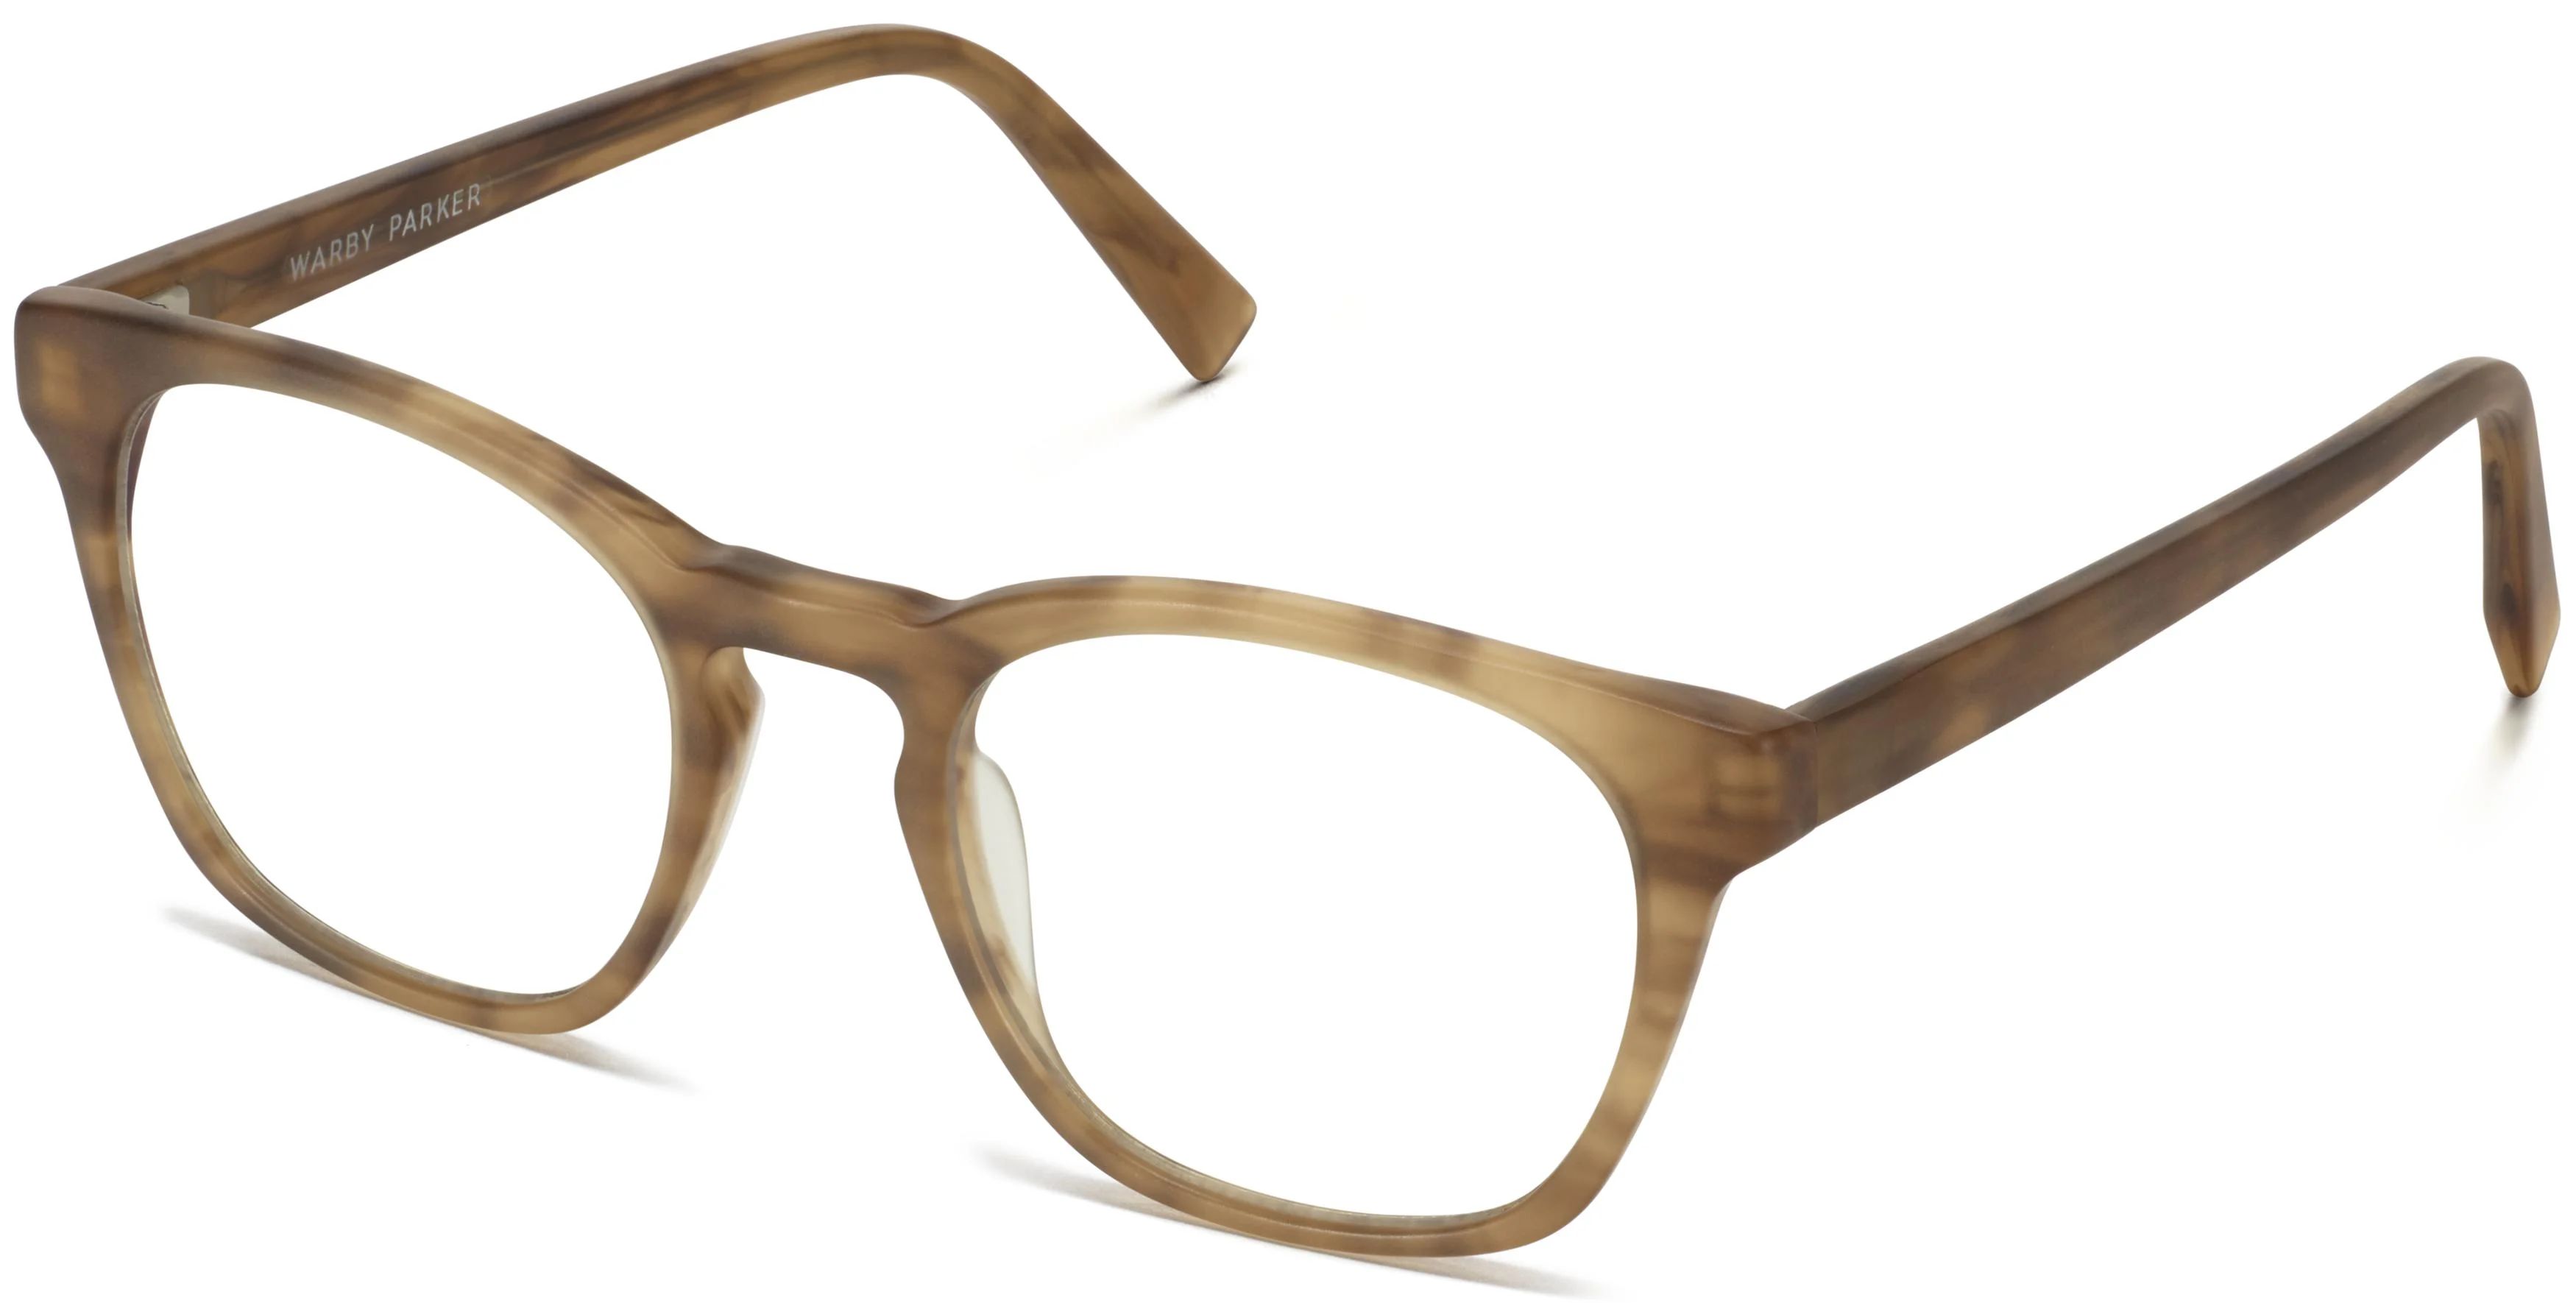 Felix Eyeglasses in Pacific Crystal | Warby Parker | Warby Parker (US)